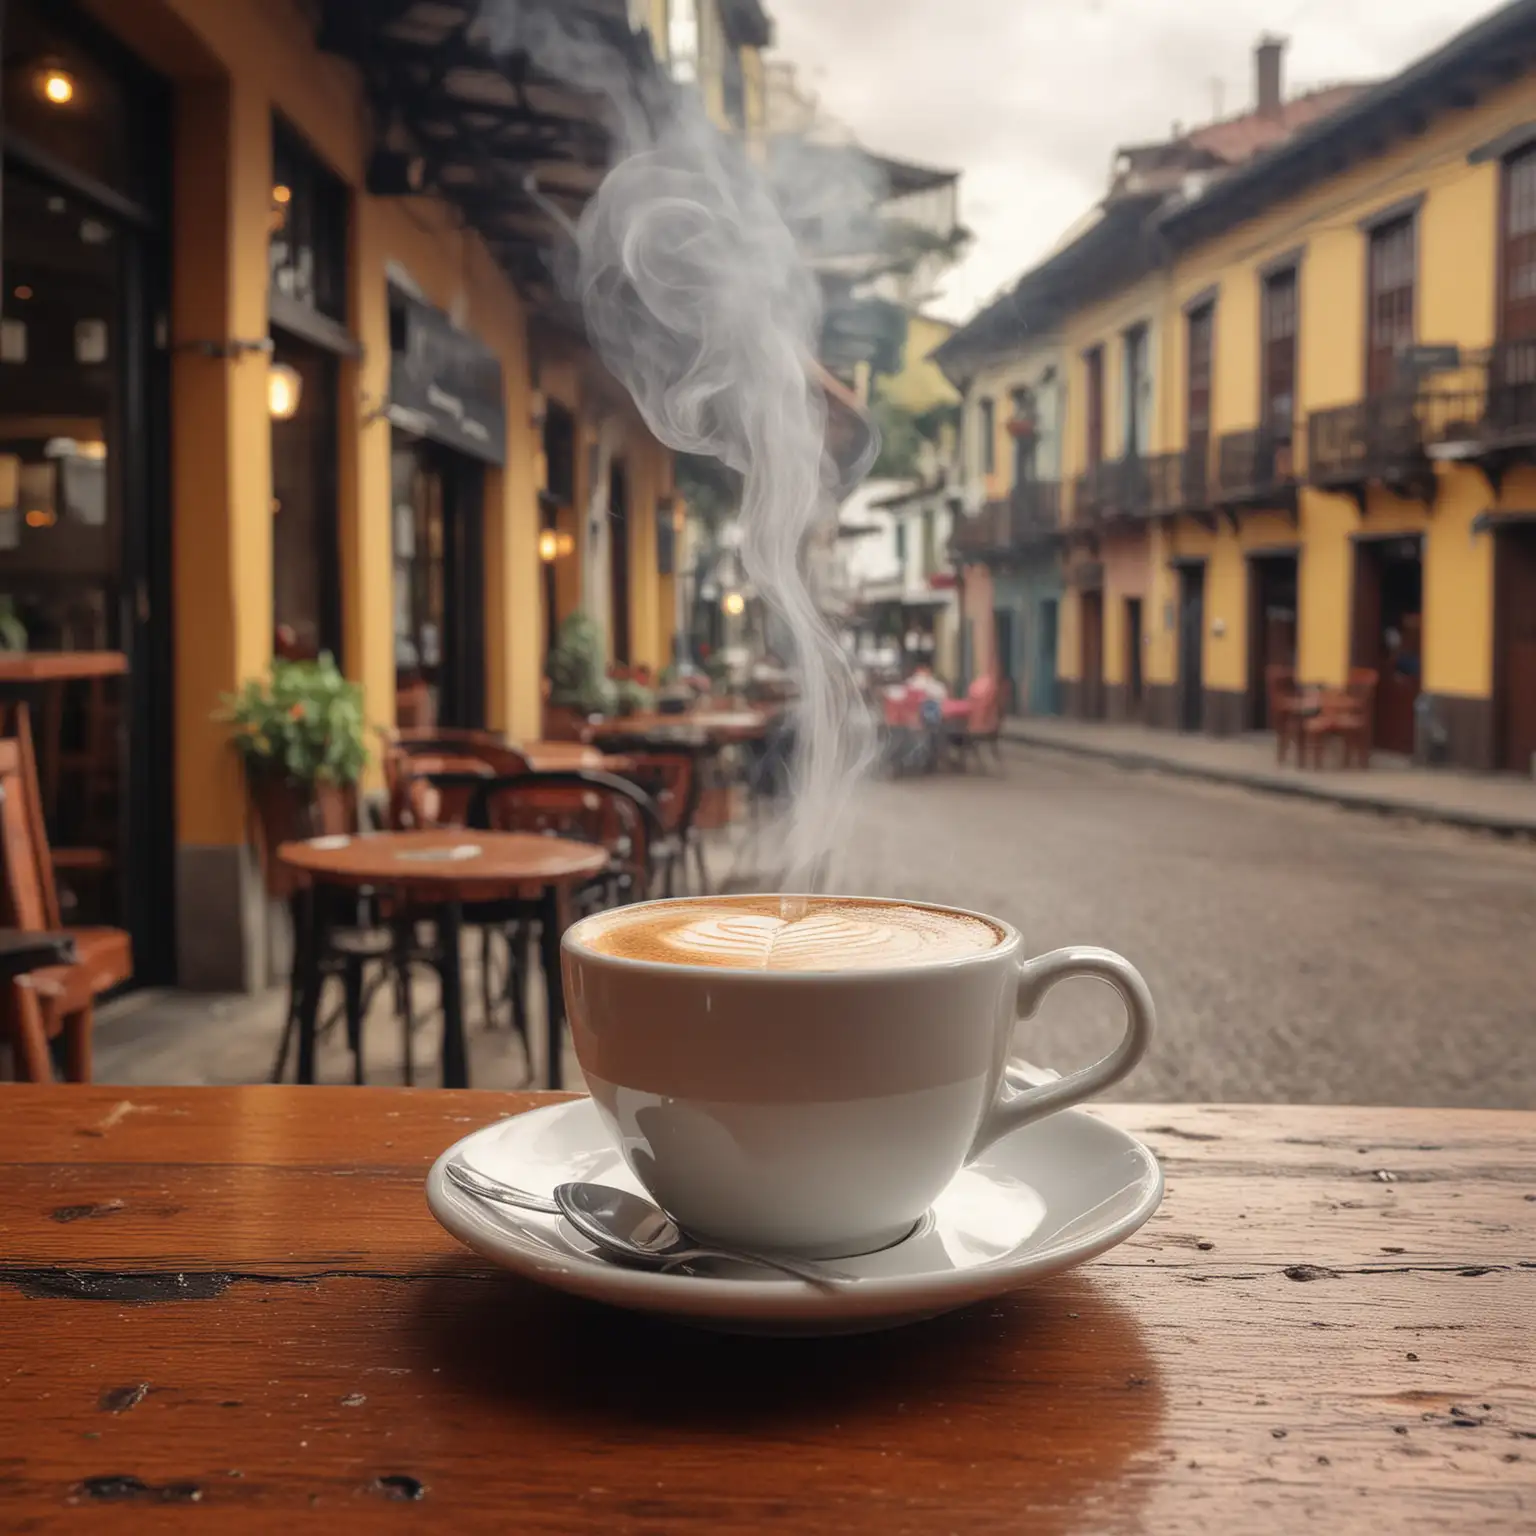 Show me a very nice and steaming cup of coffee with a very nice and cozy colombian coffee place on the background